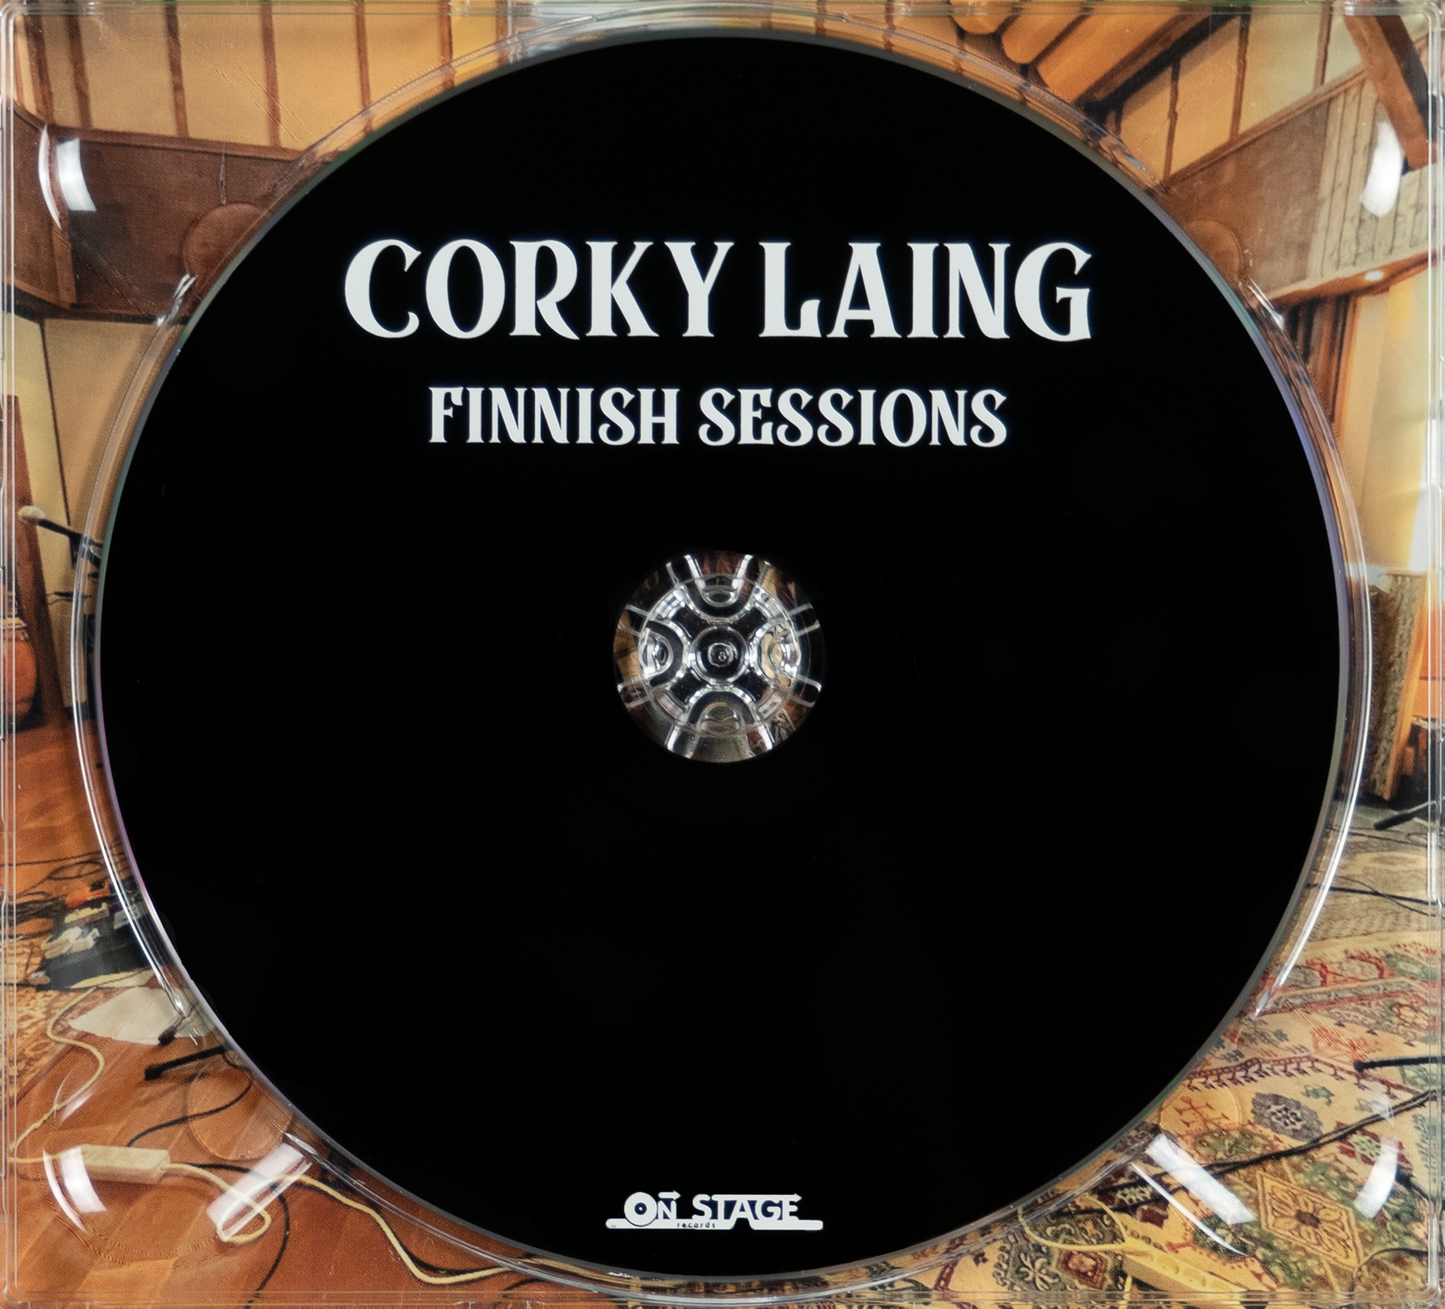 Corky Laing´s MOUNTAIN - Finnish Sessions, CD